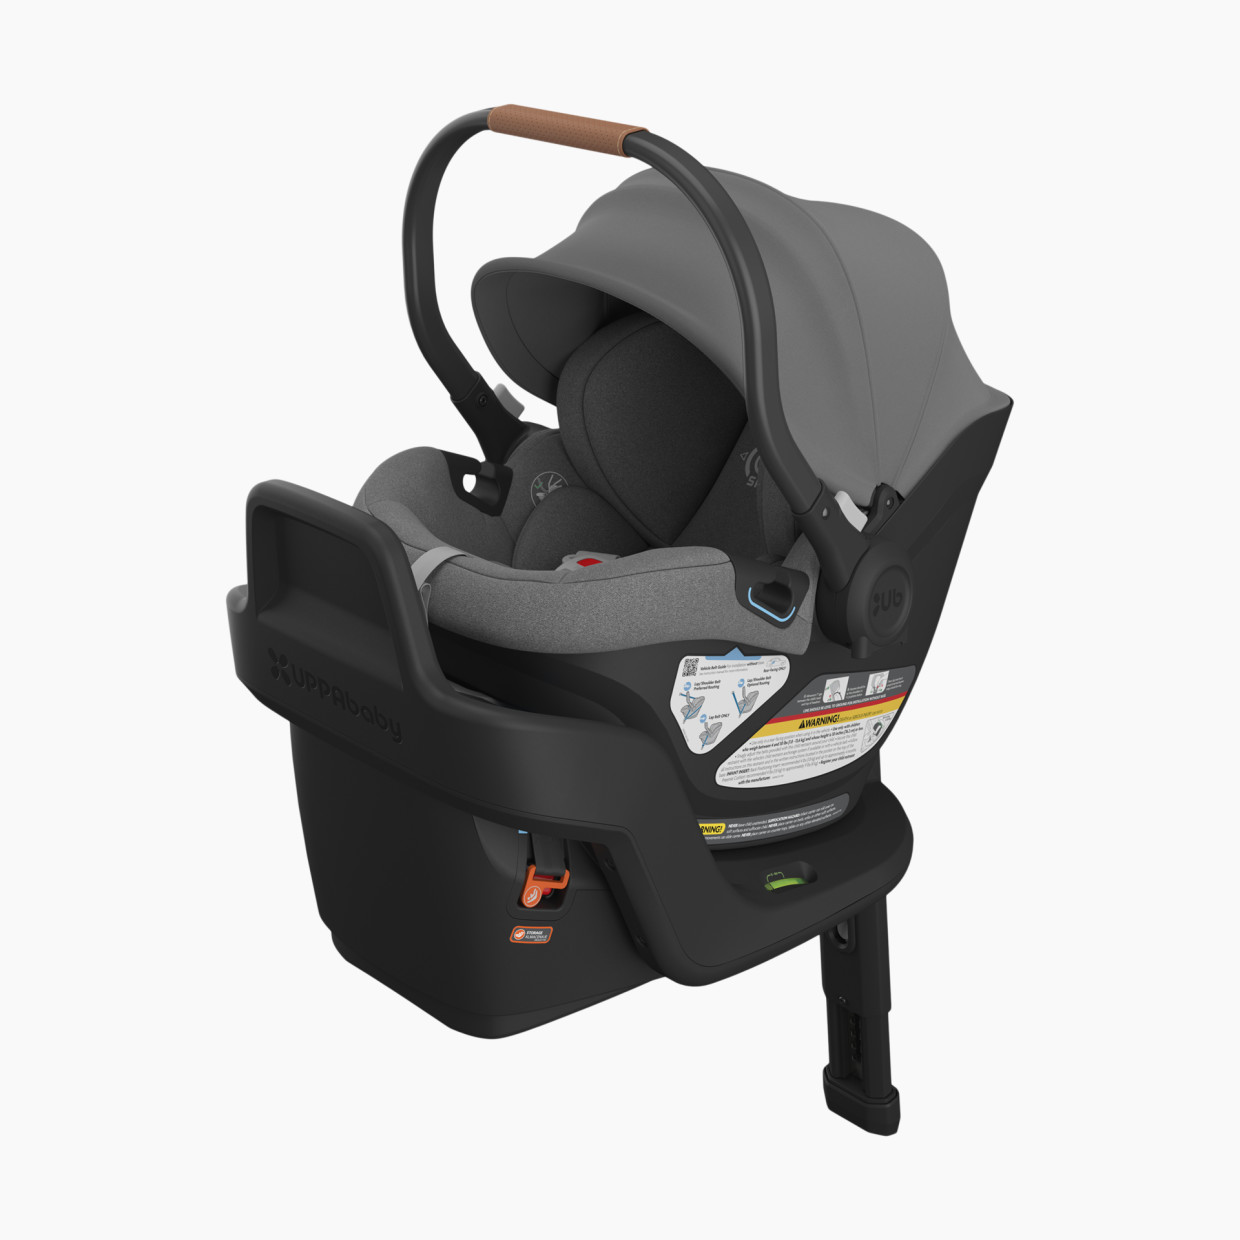 UPPAbaby Aria Infant Car Seat - Greyson.